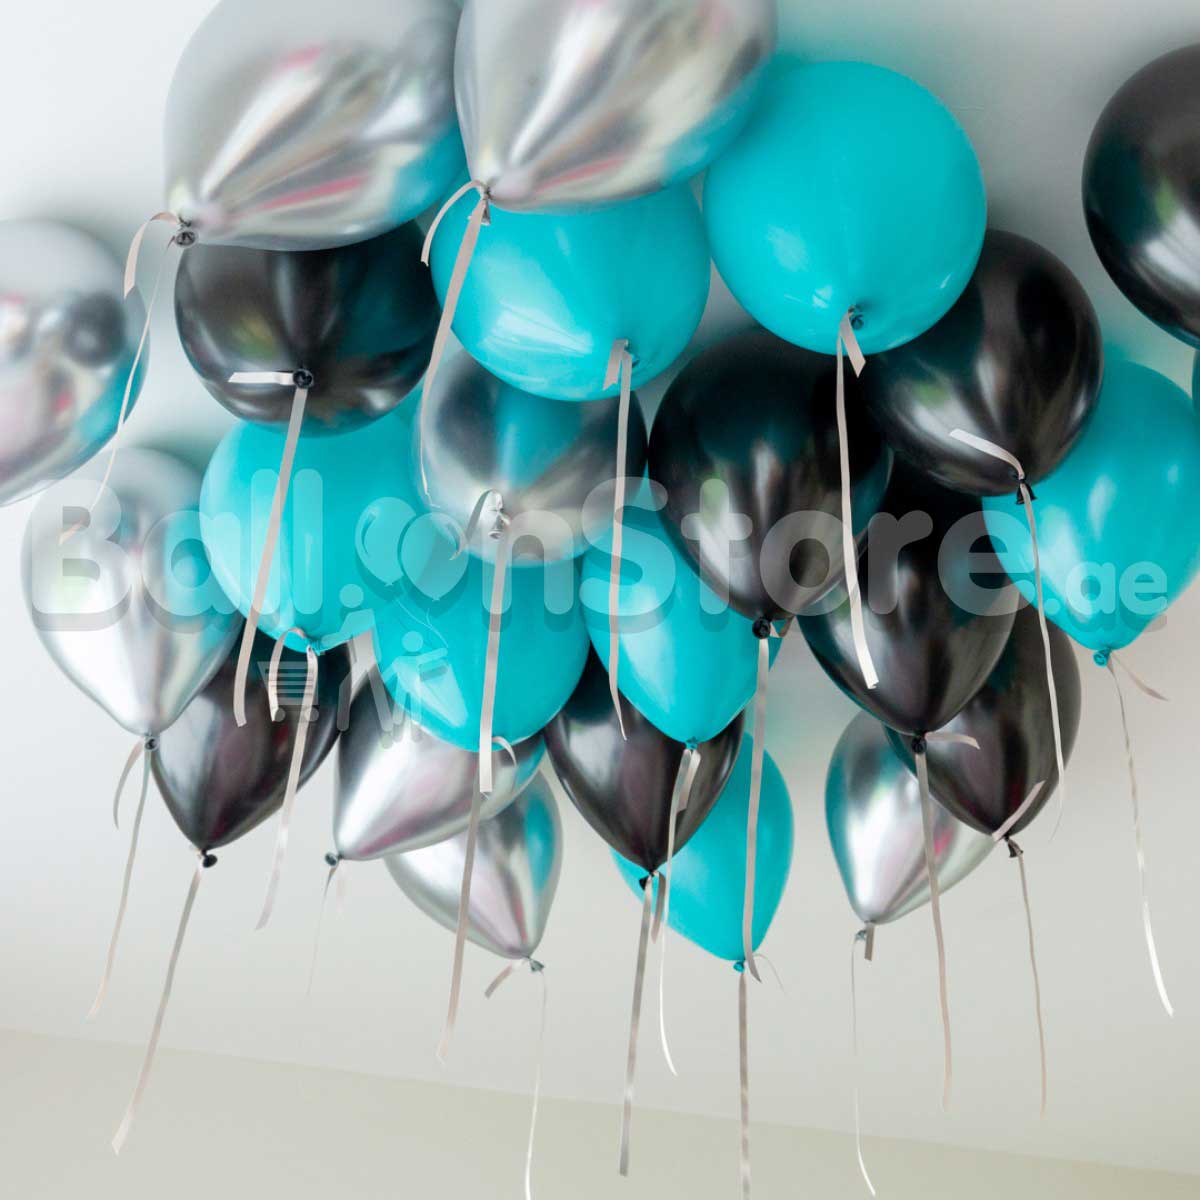 Tropical Teal  (Turquoise) Chrome Helium Ceiling Balloons -   25count